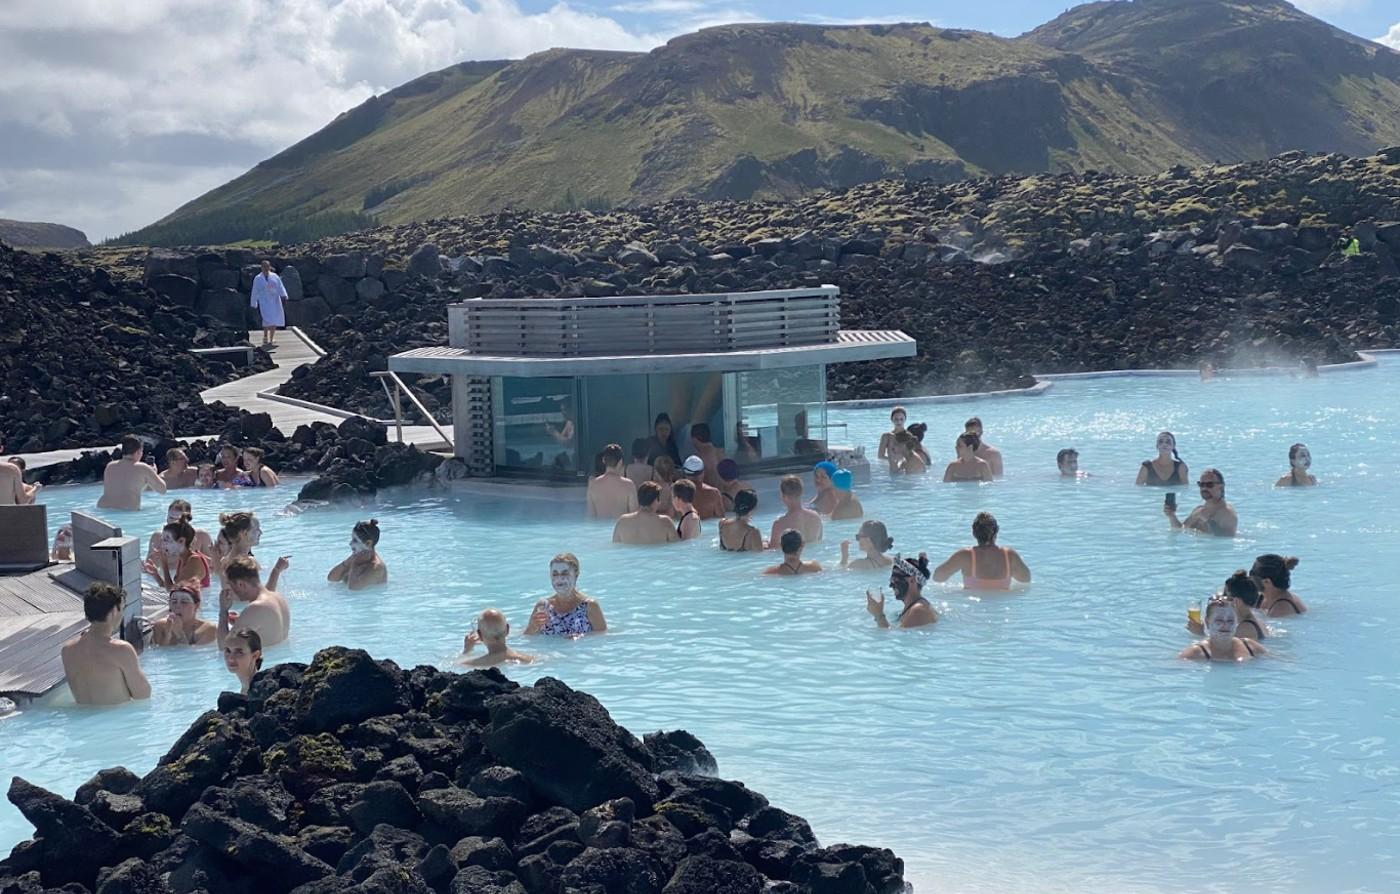 The Blue Lagoon spa, which uses mineral-rich hot water and facemasks from the geothermal operations. 